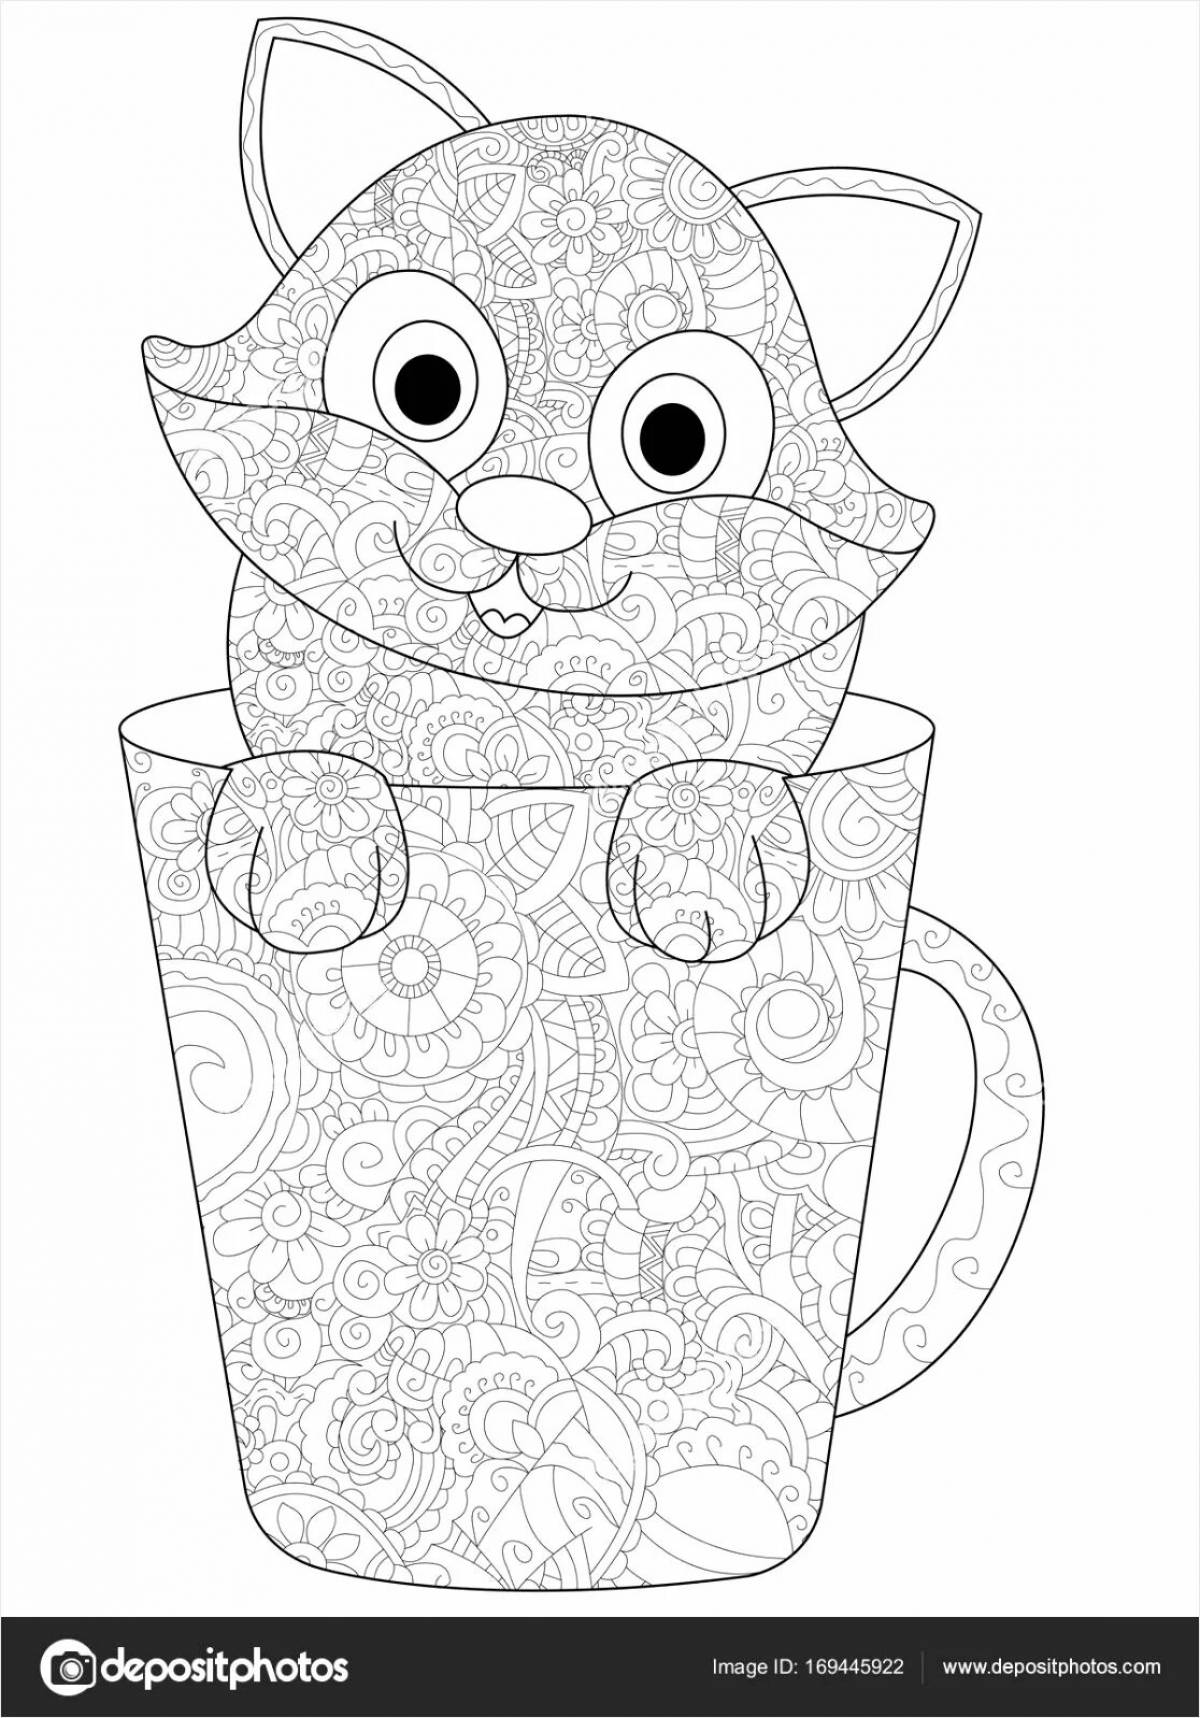 Relaxed cat in a mug coloring book